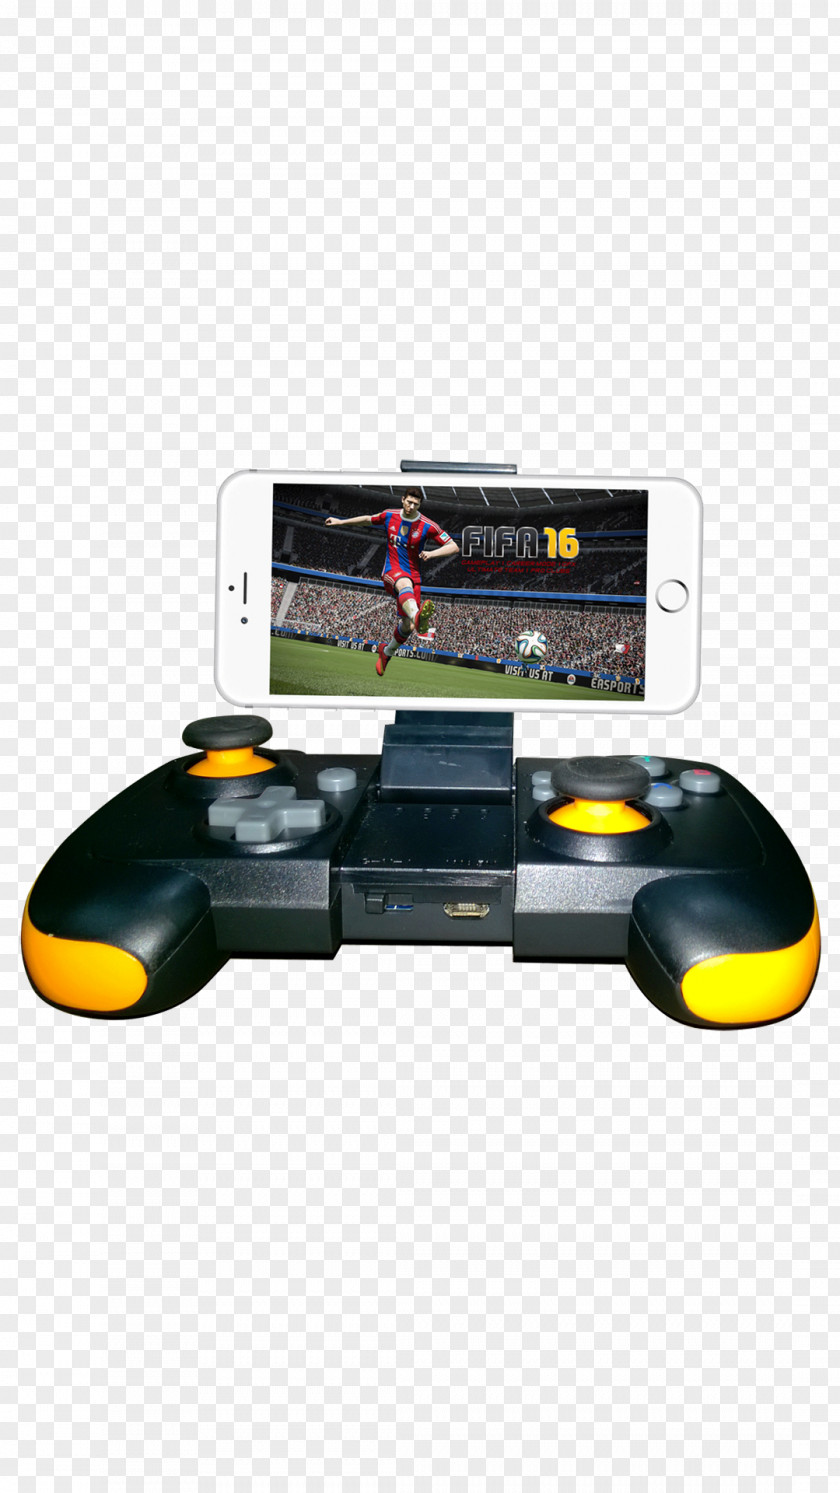 Gamepad Video Game Consoles Joystick Xbox Console Accessories Controllers PNG